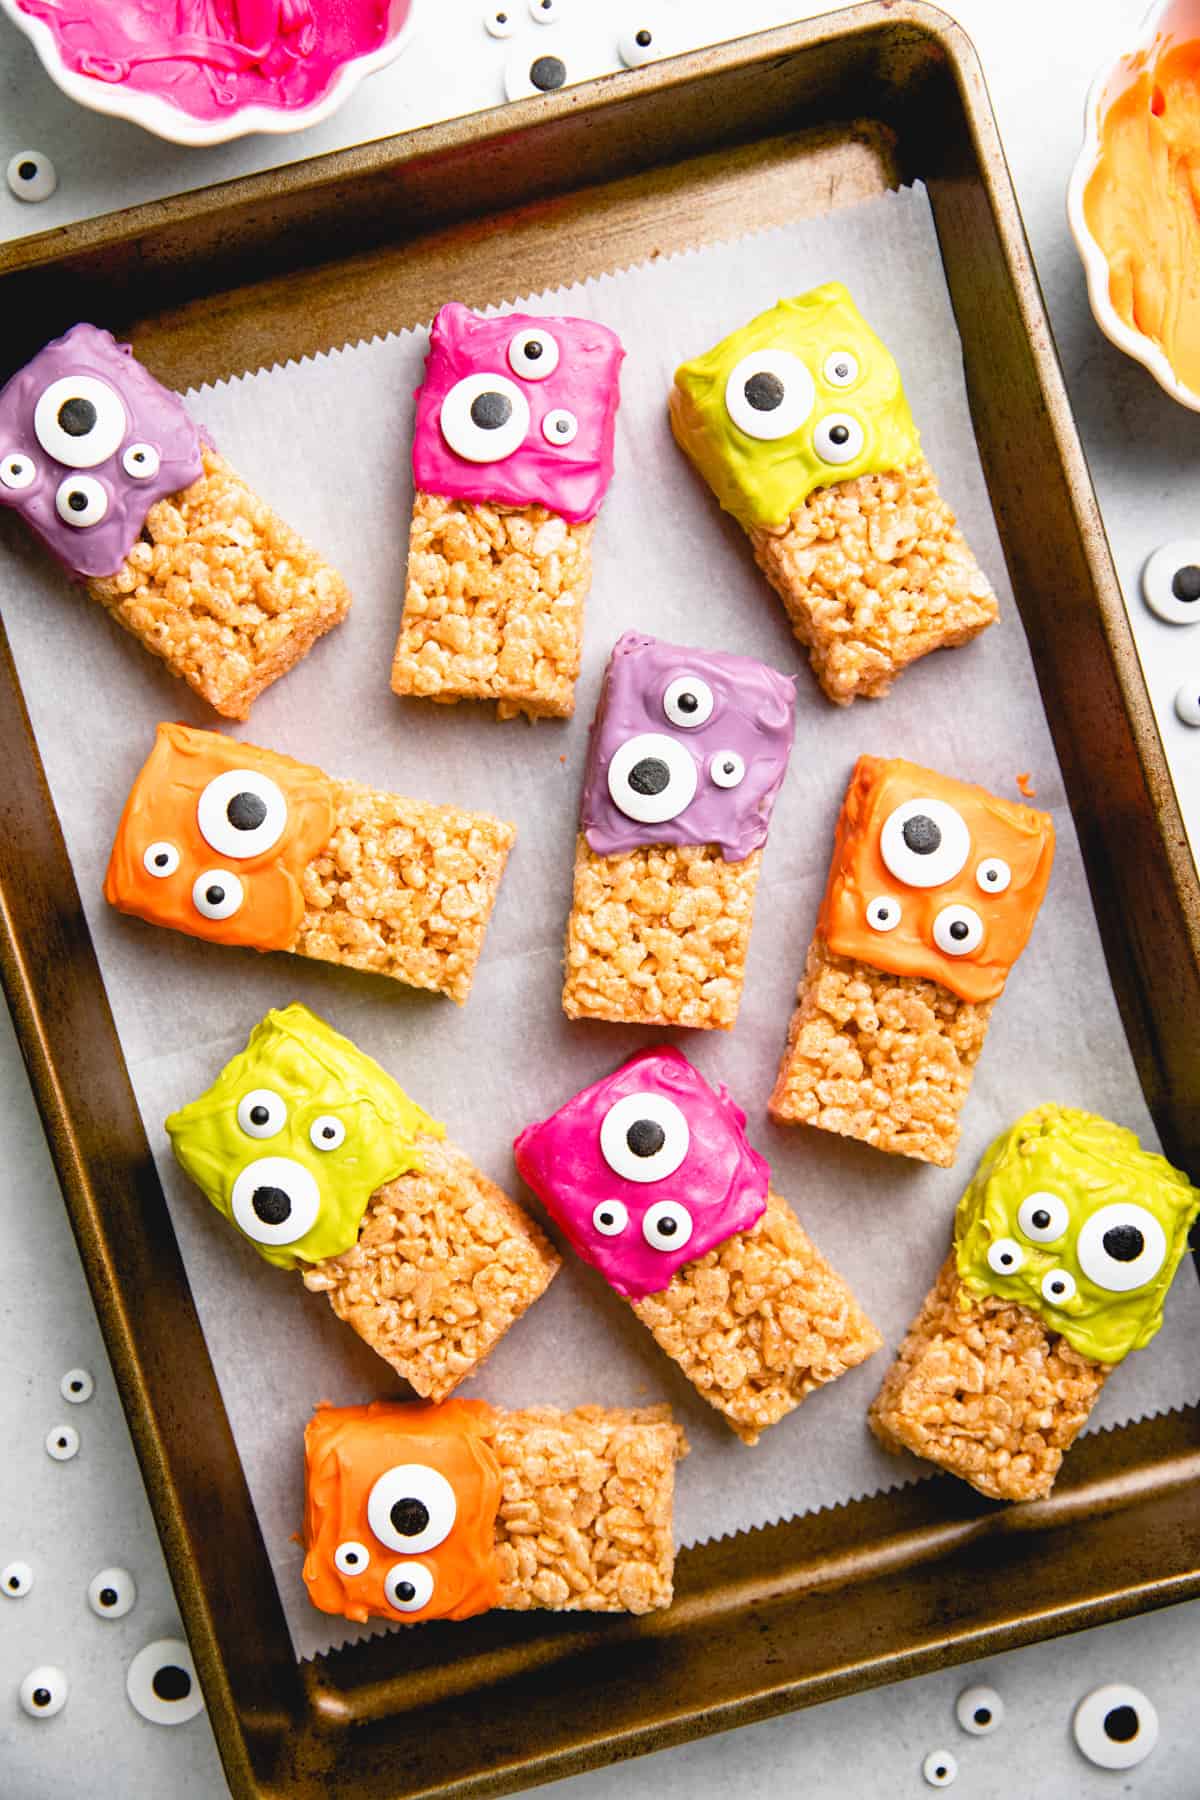 Halloween Rice Krispie Treats, topped with colored icing and candy eyes on baking sheet with parchment paper.